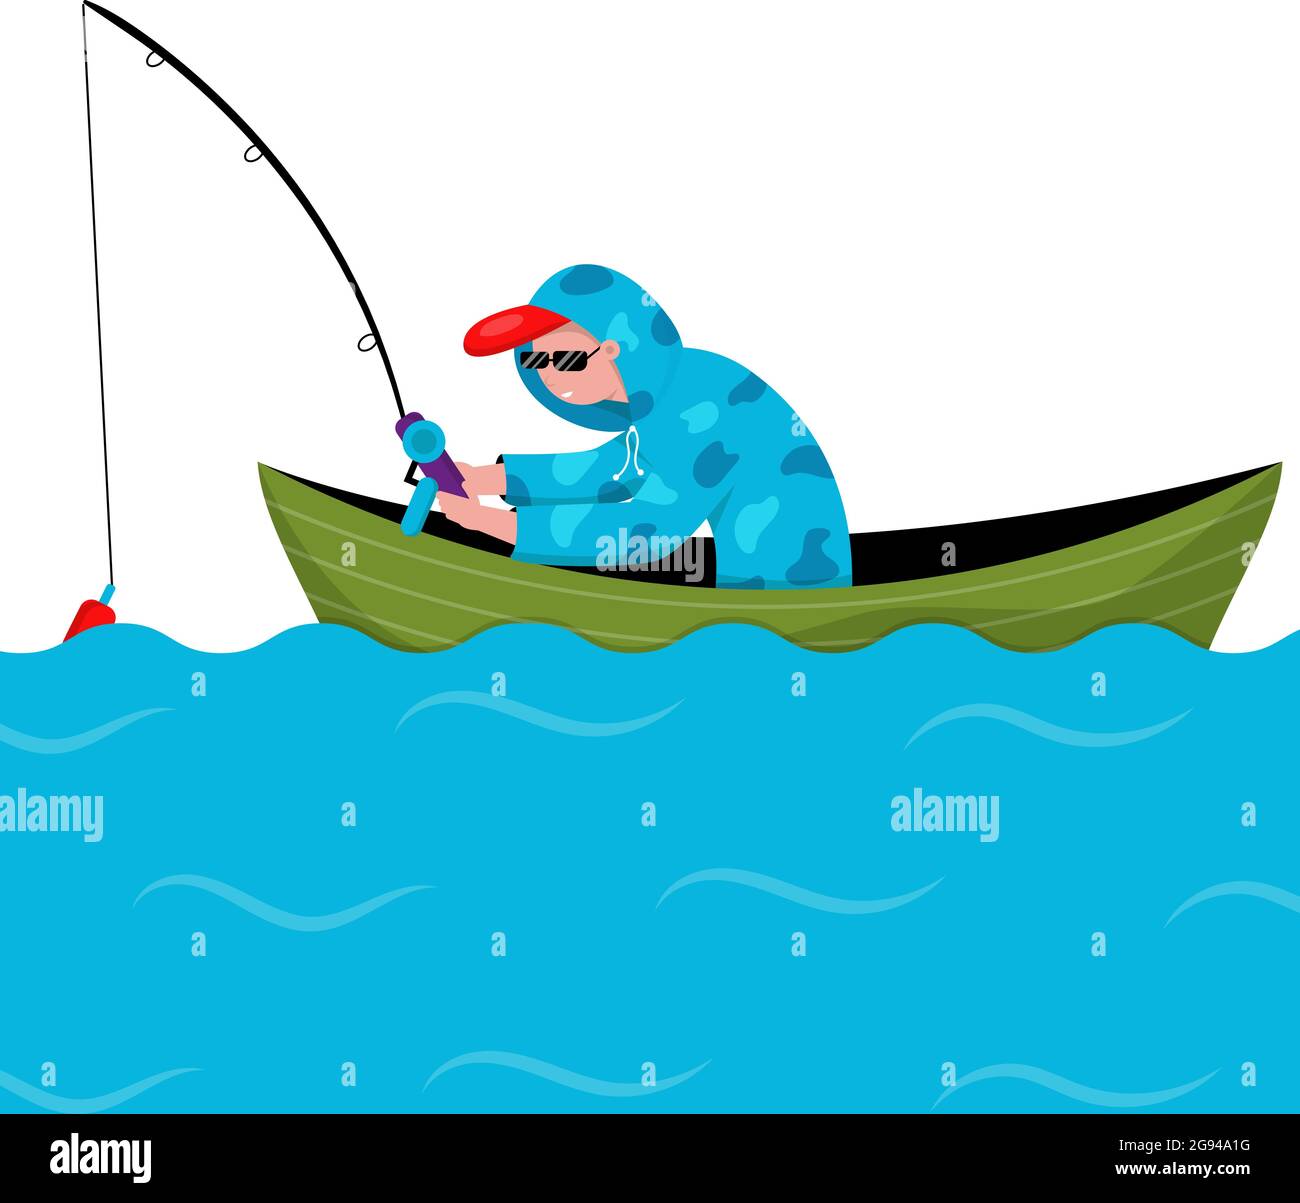 https://c8.alamy.com/comp/2G94A1G/fishing-in-nature-fishing-quiet-hunting-vector-character-man-on-white-background-sitting-in-a-boat-and-holding-a-fishing-pole-2G94A1G.jpg